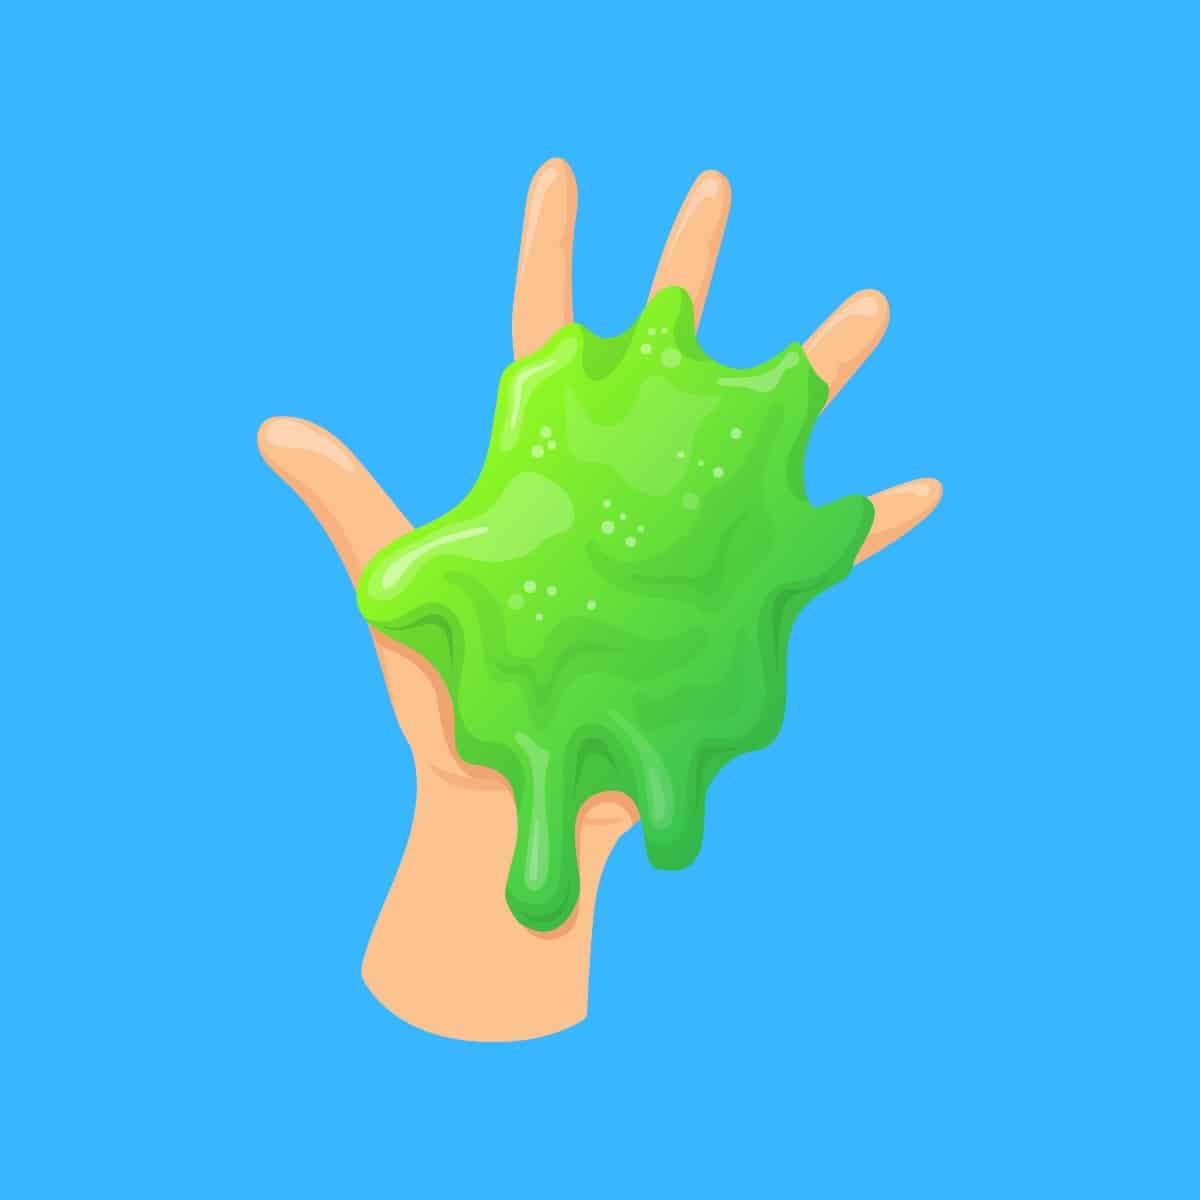 Cartoon graphic of a hand covered in green slime on a blue background.